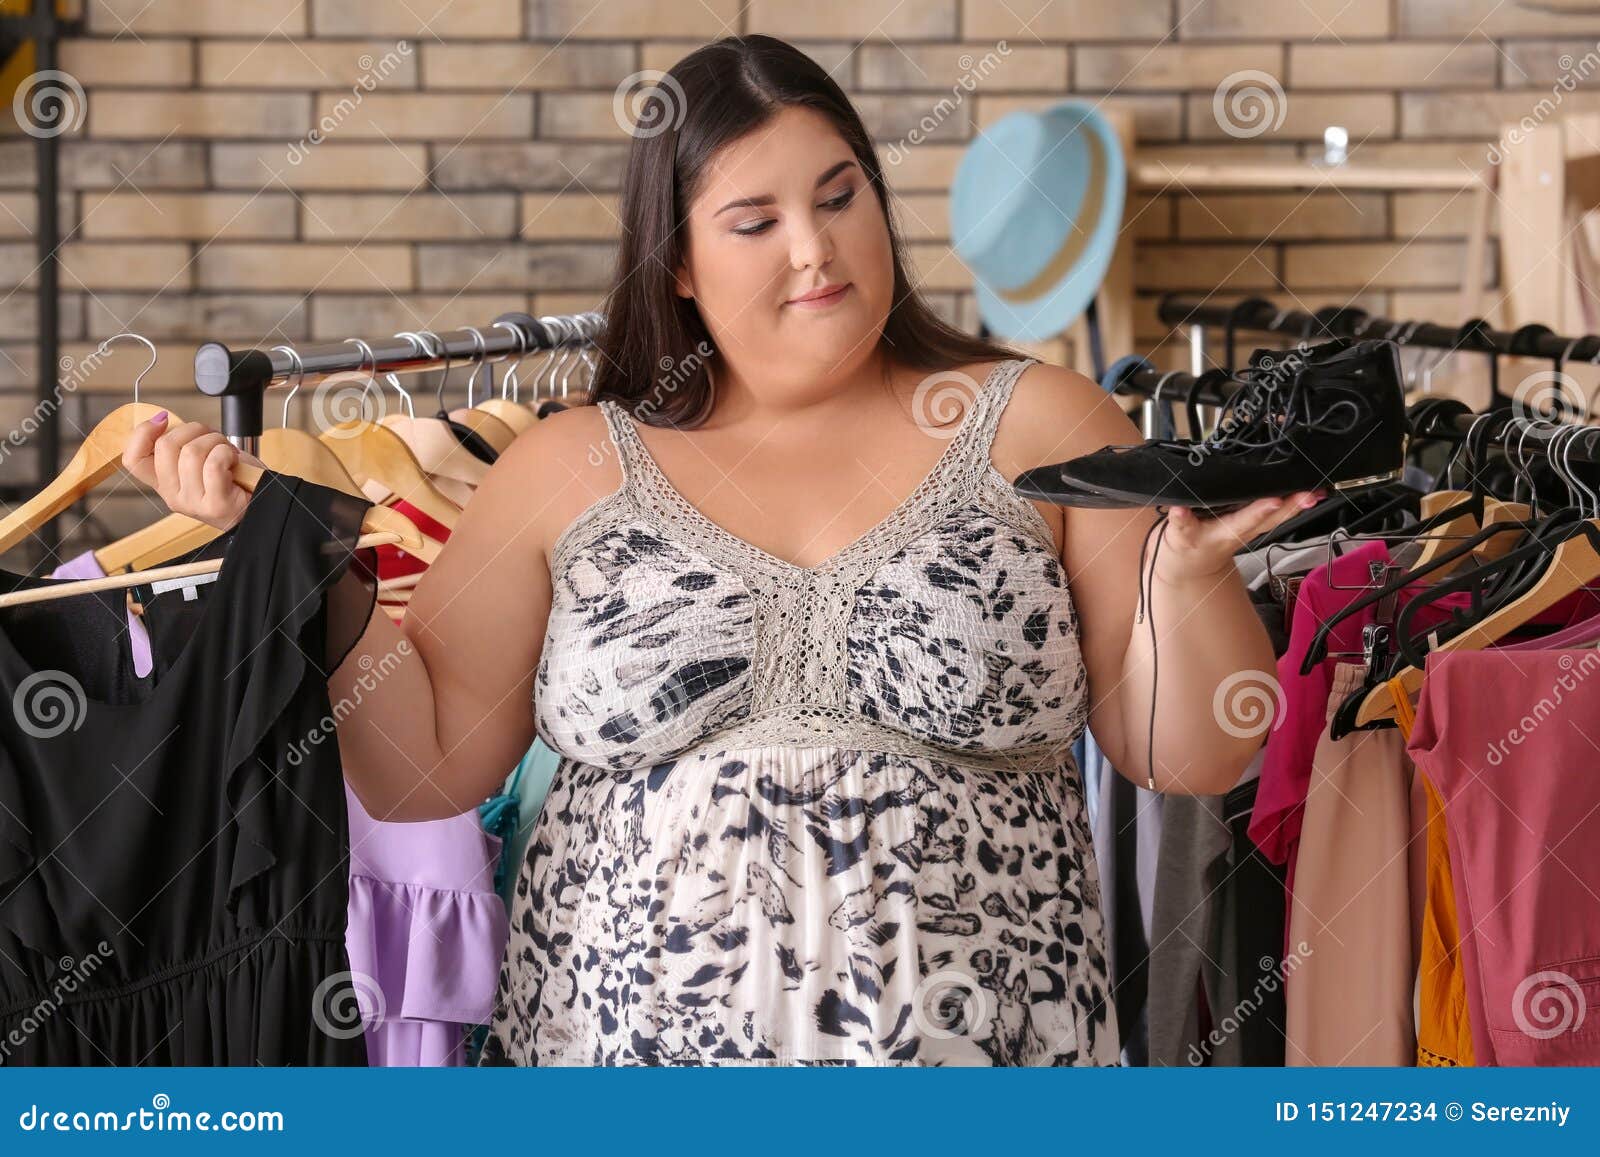 overweight clothing stores